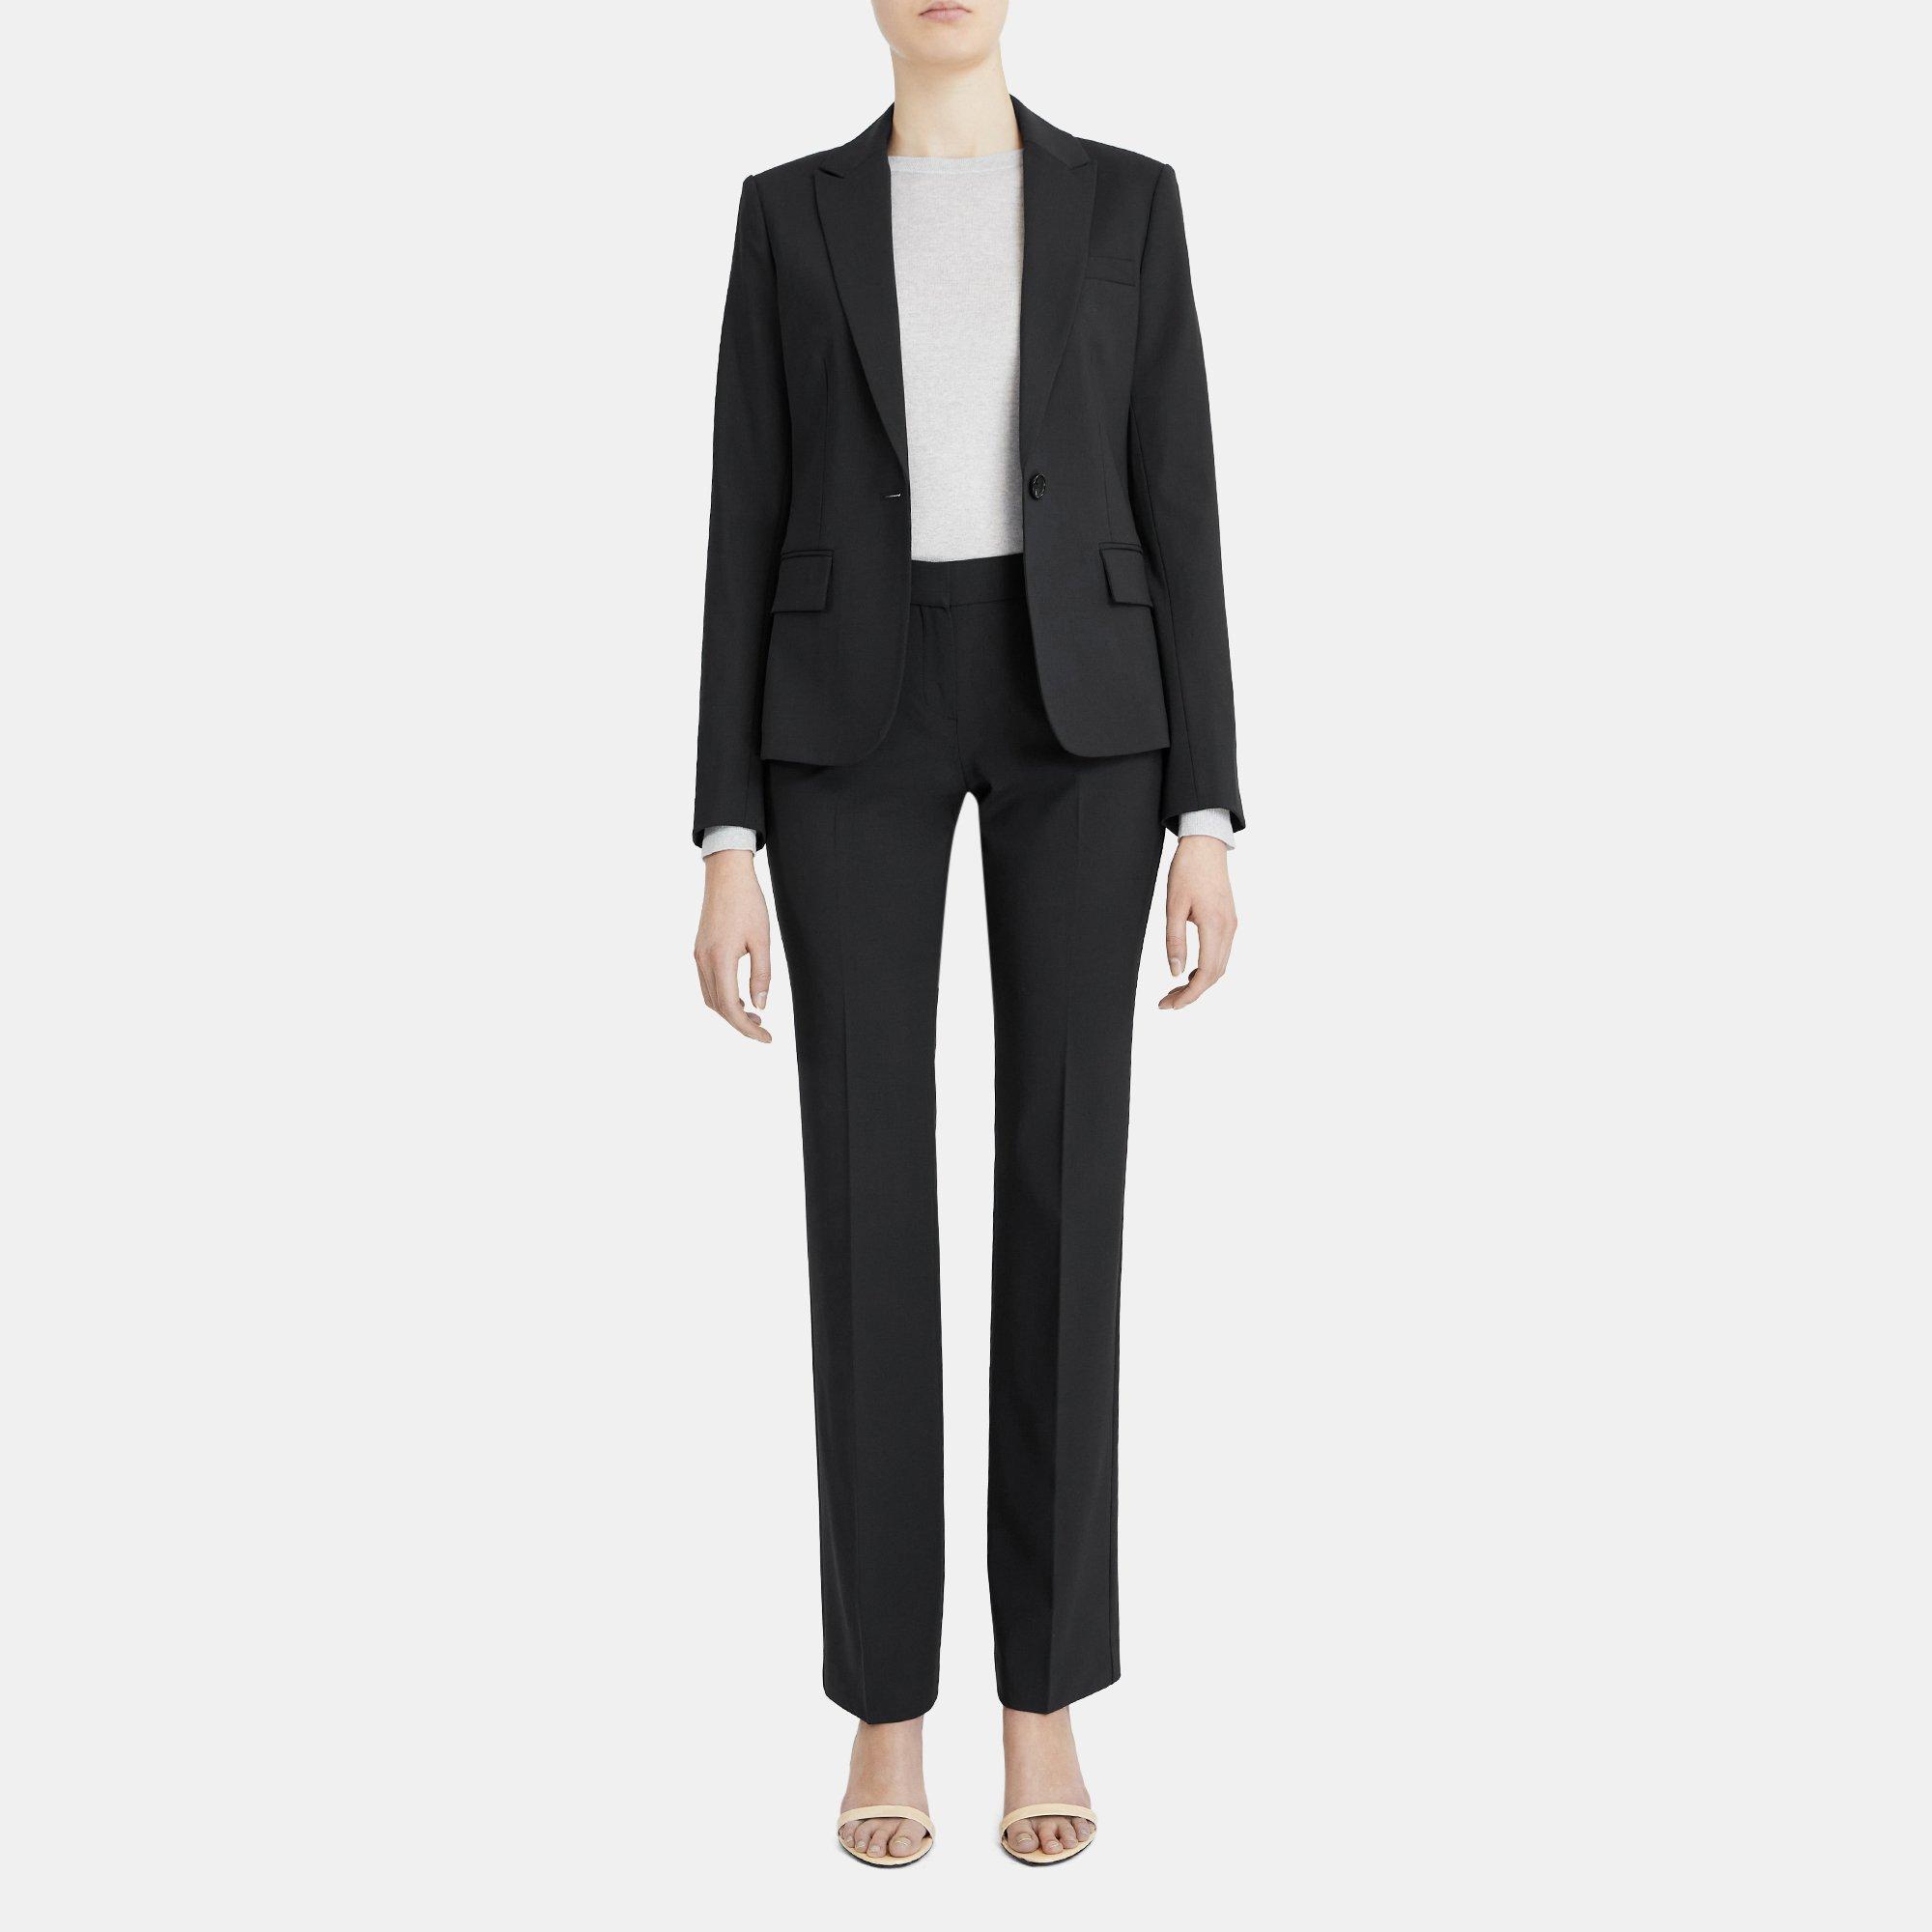 work from home outfit Nordstrom stretch blazer.